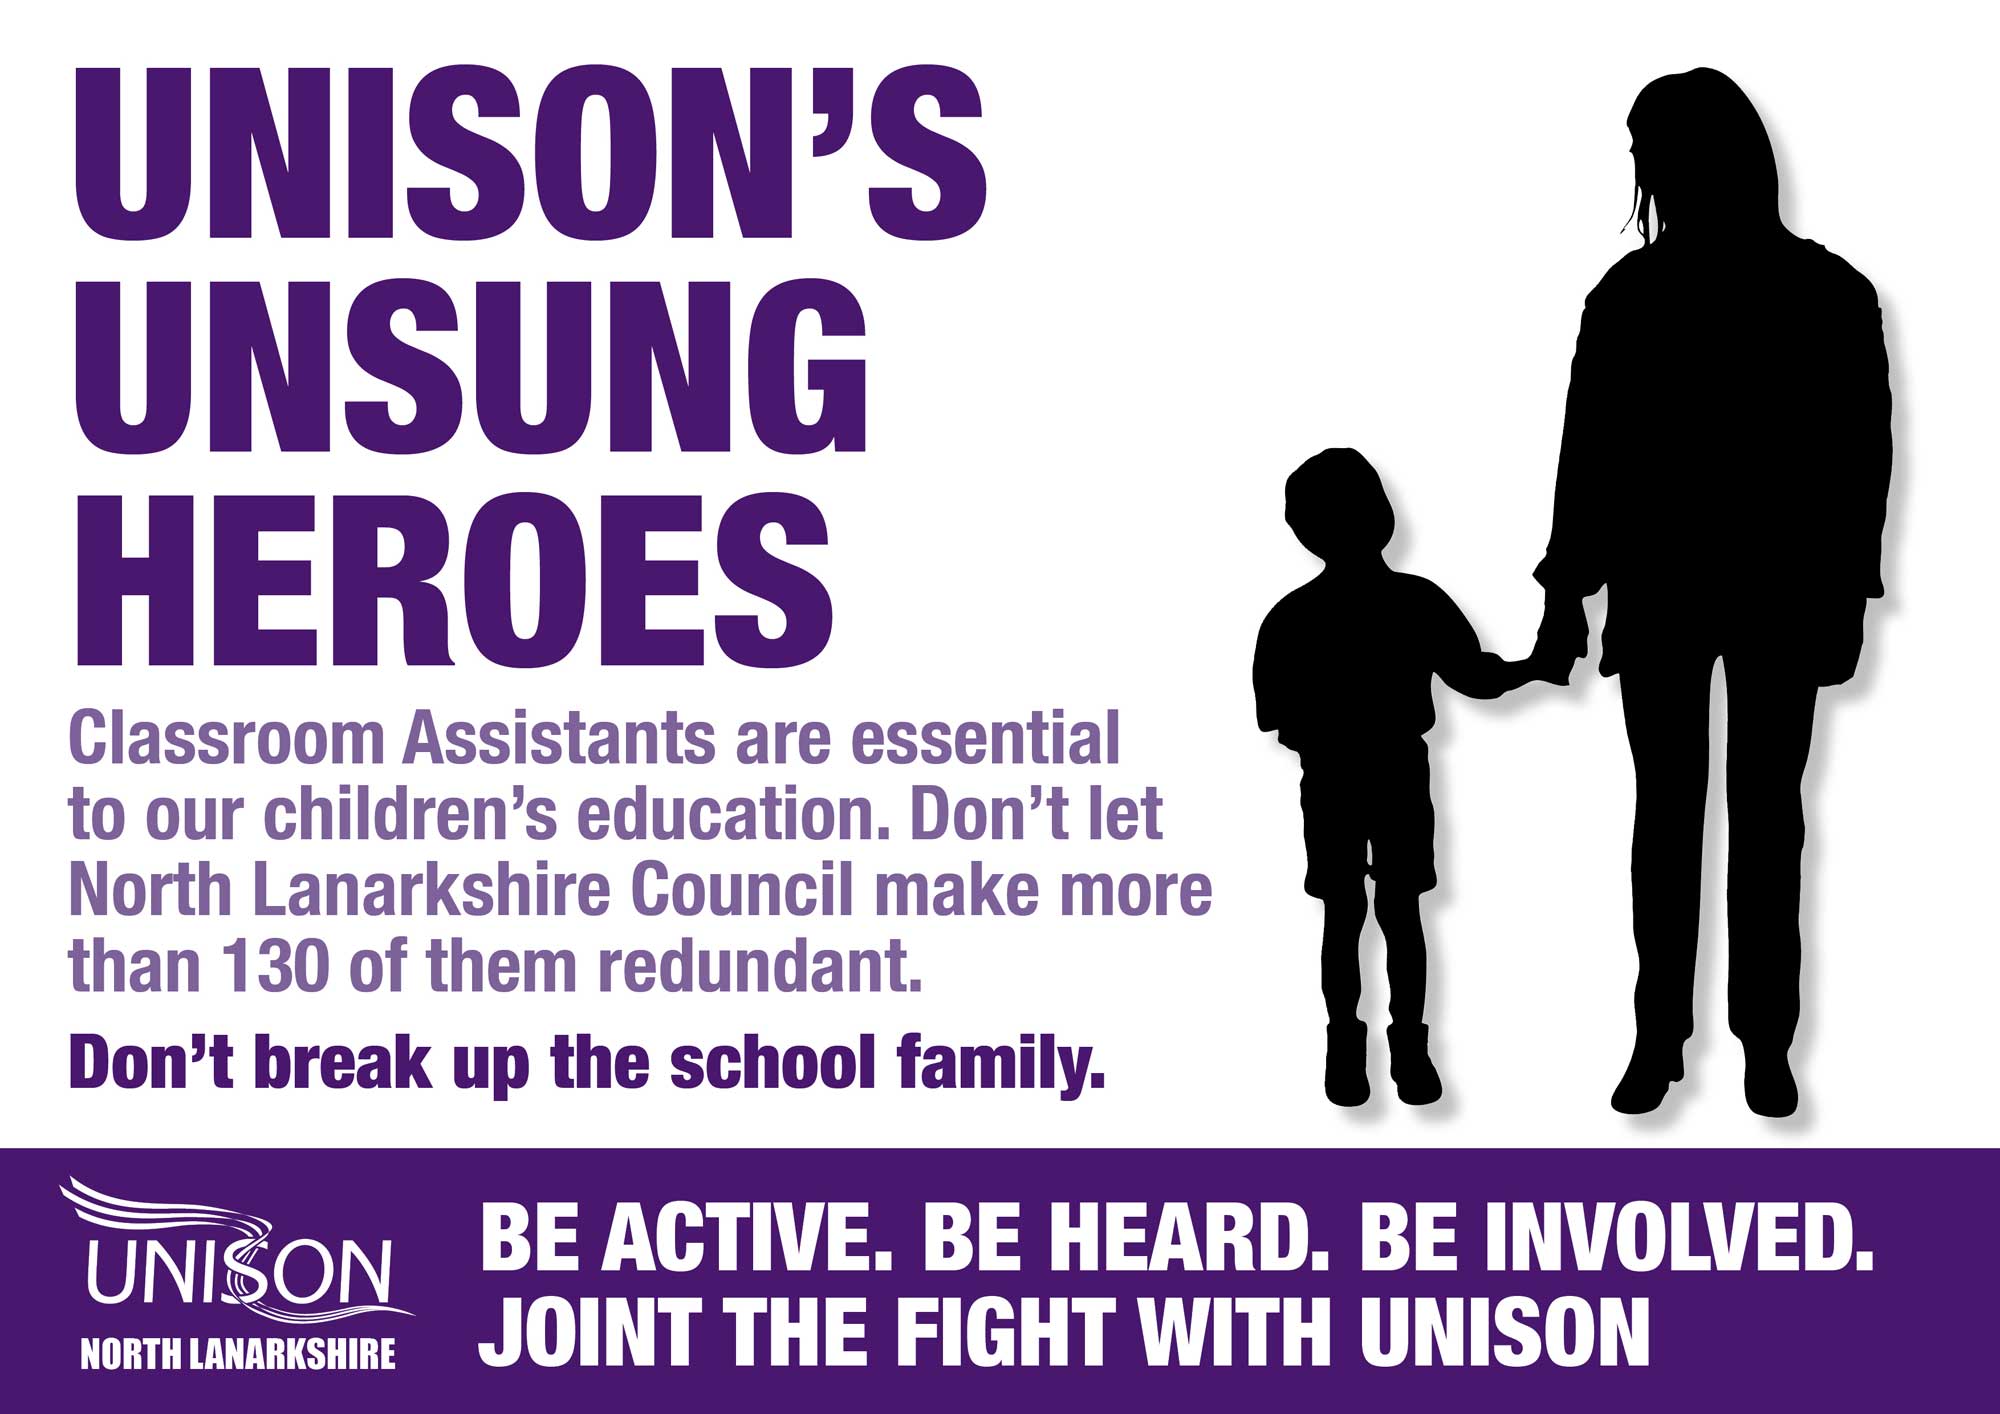 Join the Unsung Heroes in Unison’s campaign against NLC Cuts